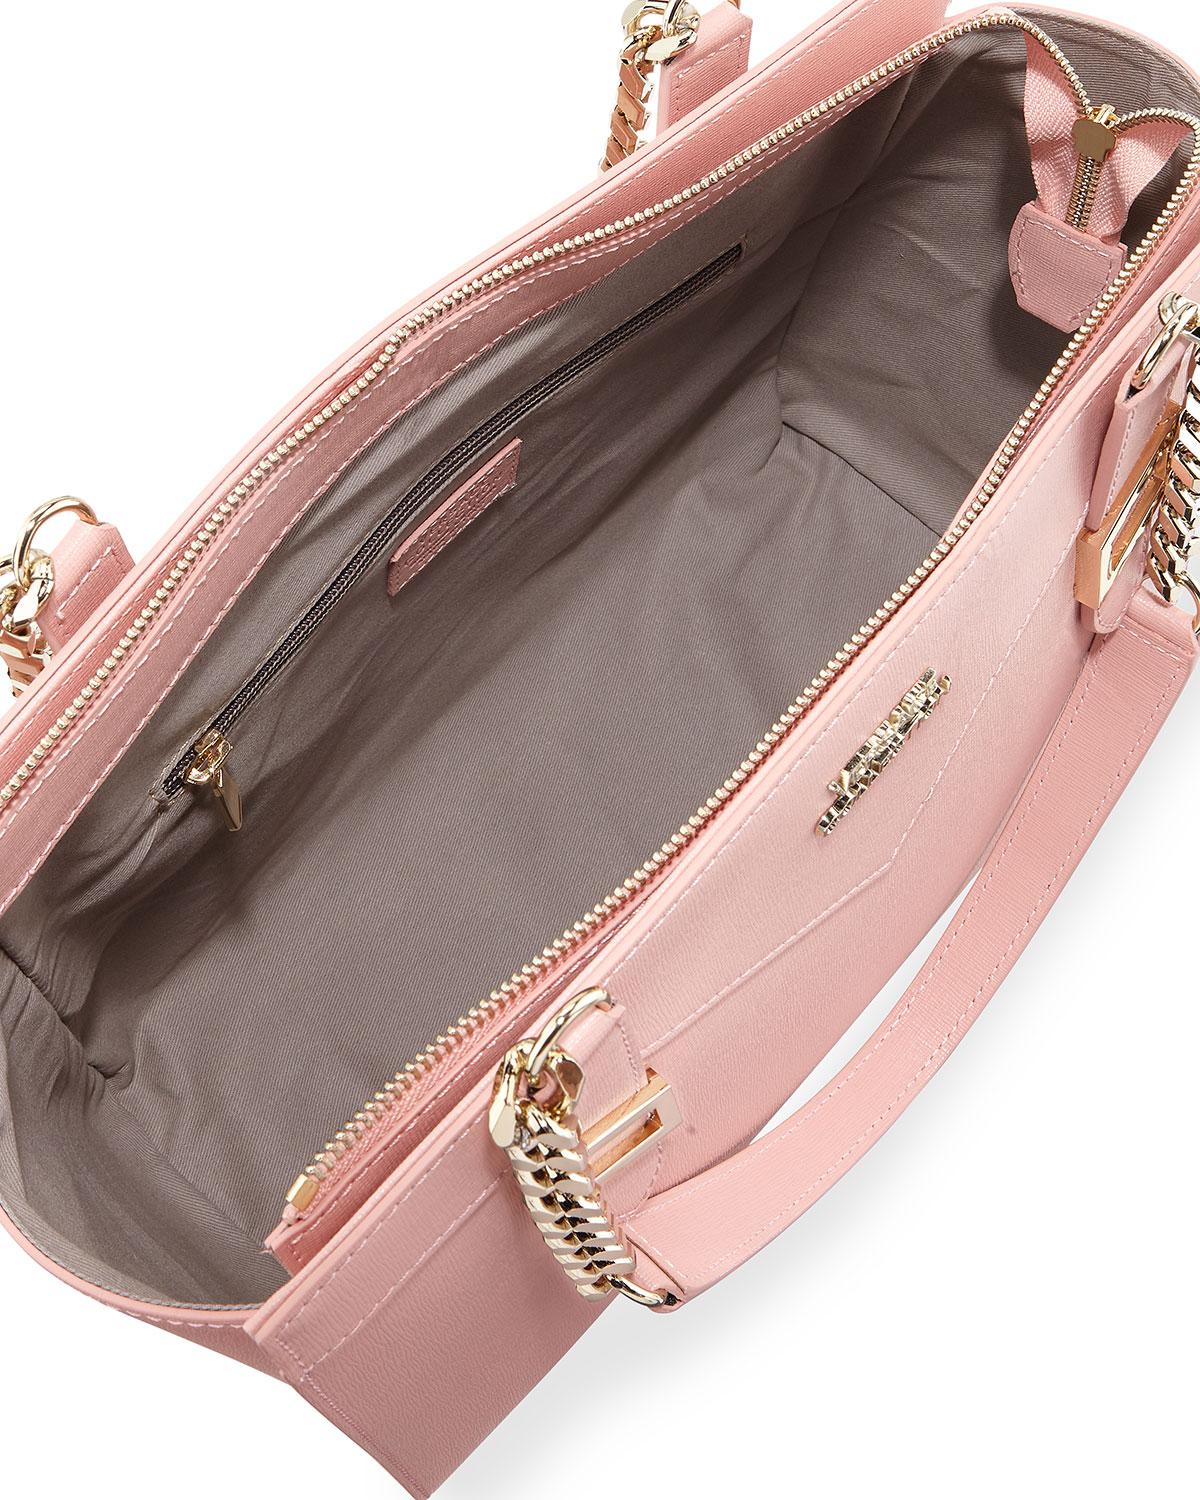 Versace Saffiano Leather Chain Shoulder Bag Pink in Pink - Lyst